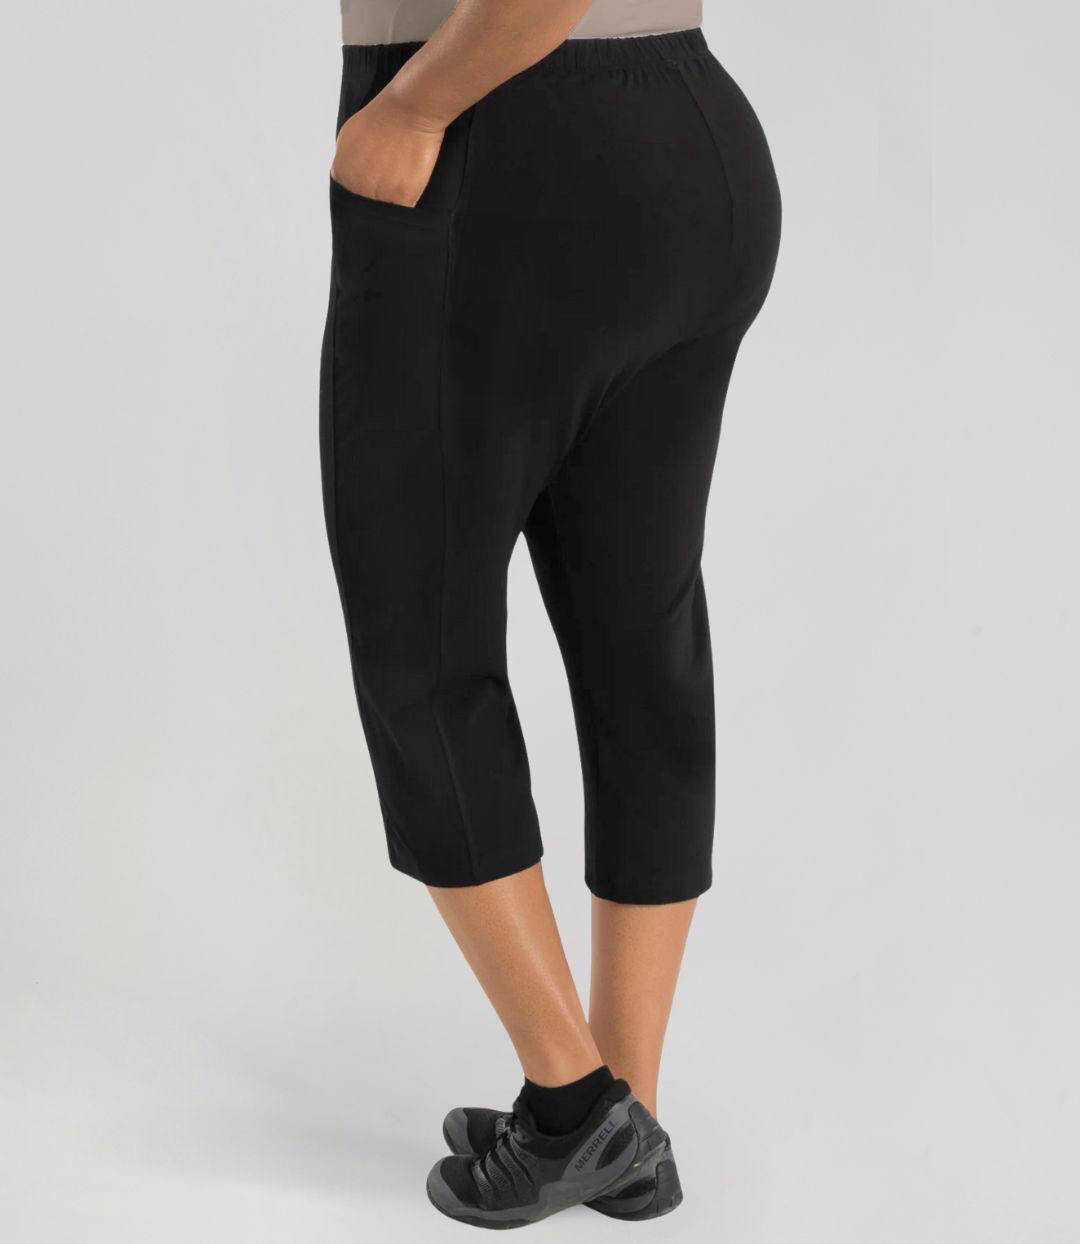 Plus size woman facing to the side and back with left hand in pocket wearing JunoActive Stretch Naturals side pocket plus size capris. The hem falls mid-calf and is form fitting without being skin tight. Color is black.